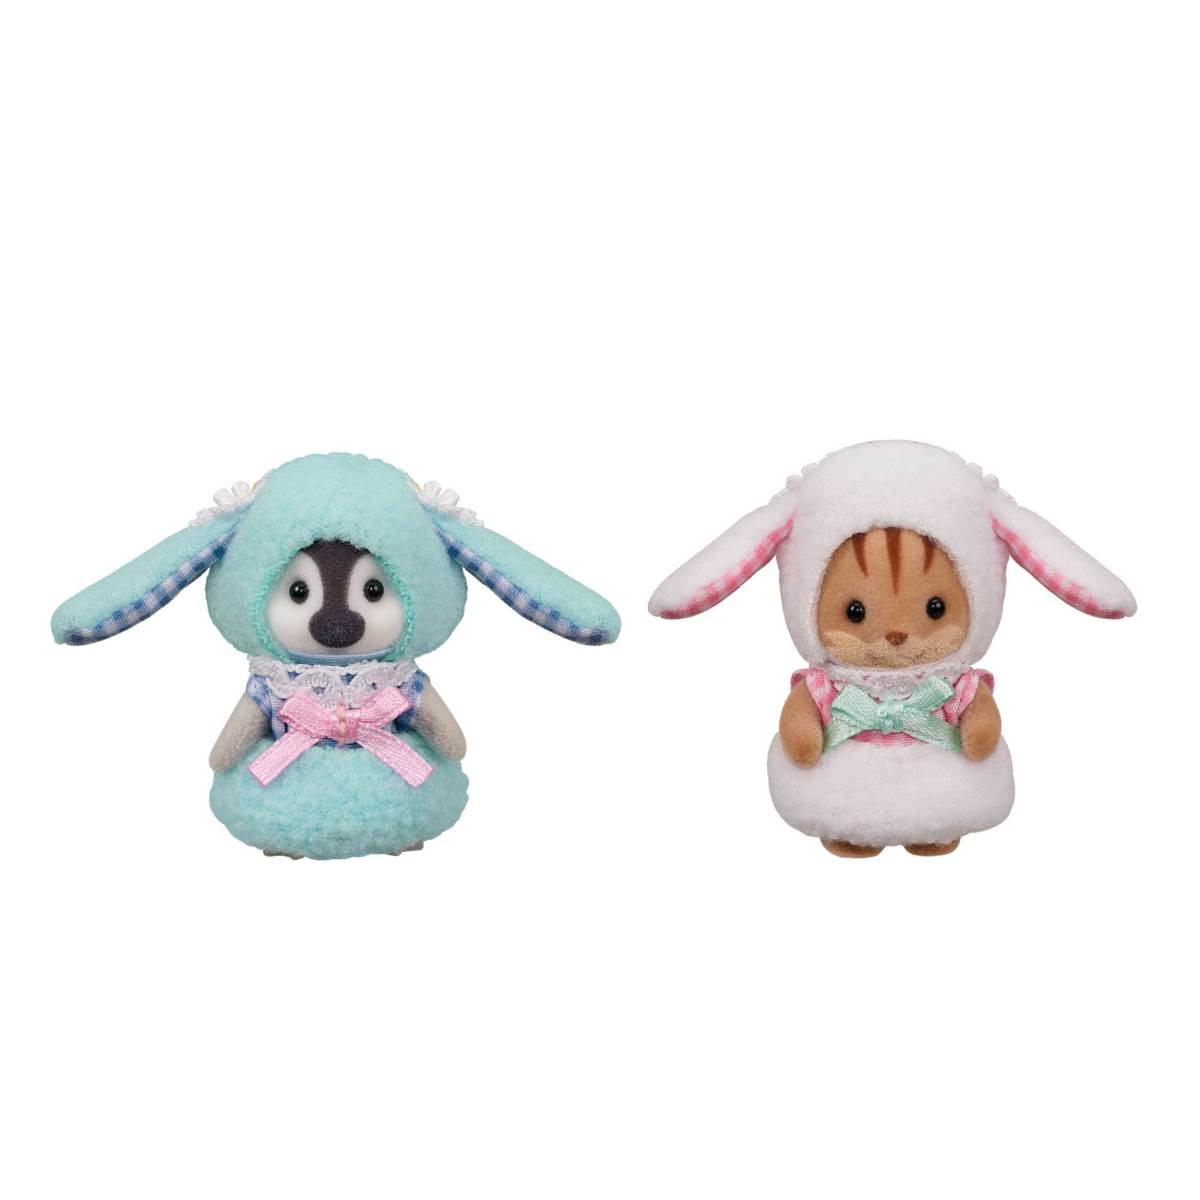 Baby Duo - Floppy-Eared Friends, , large image 0